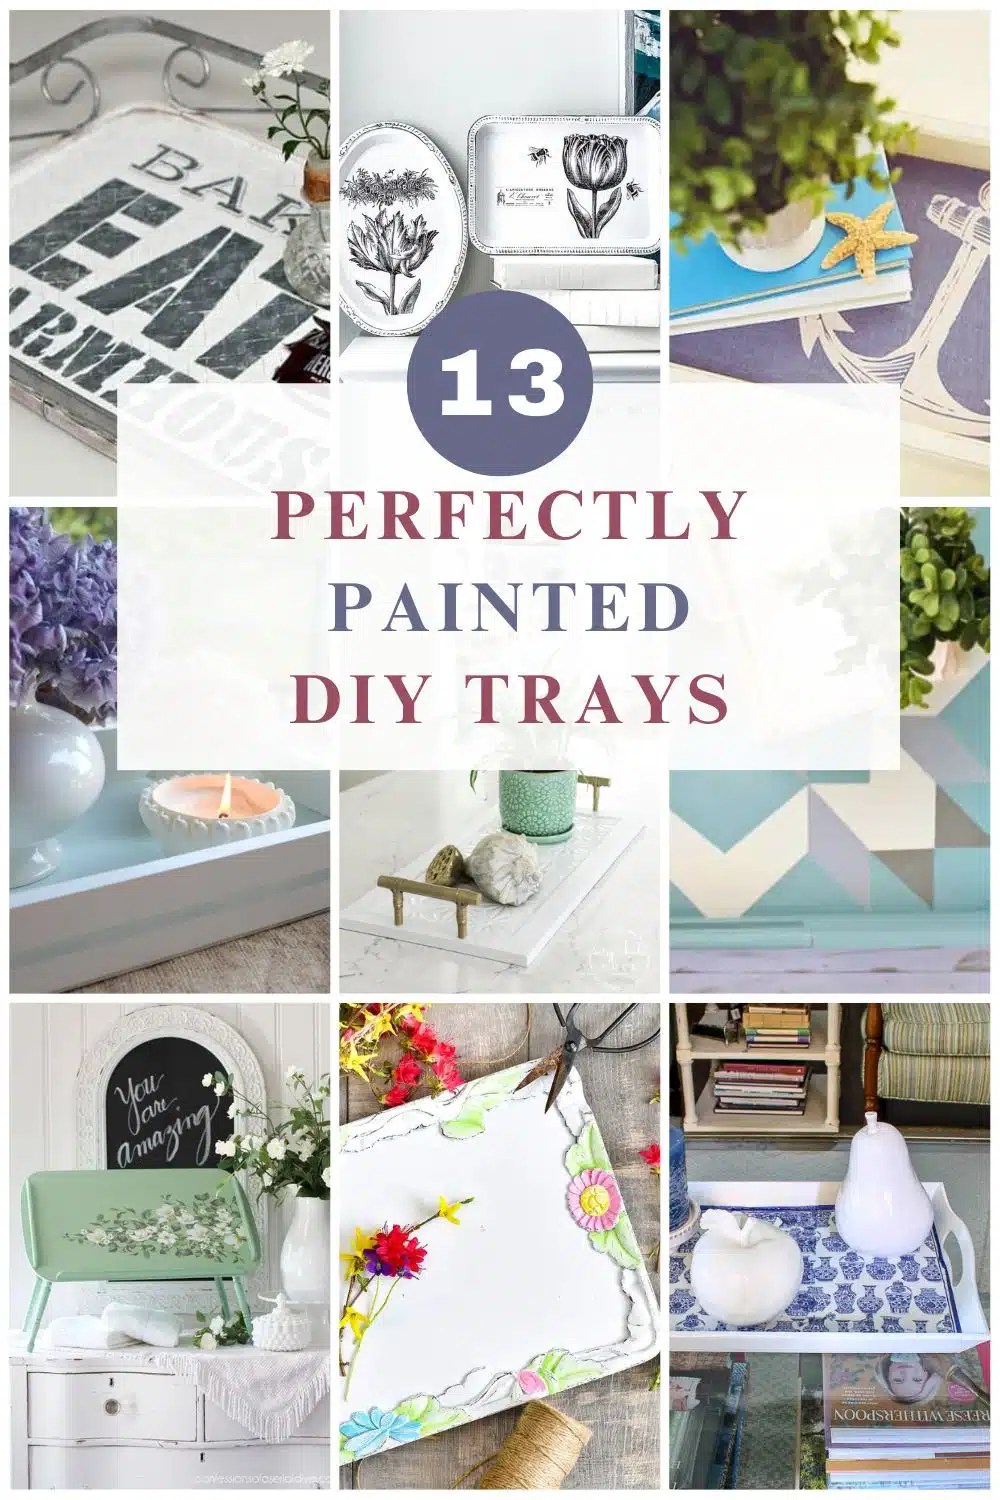 painted diy trays collage with text overlay